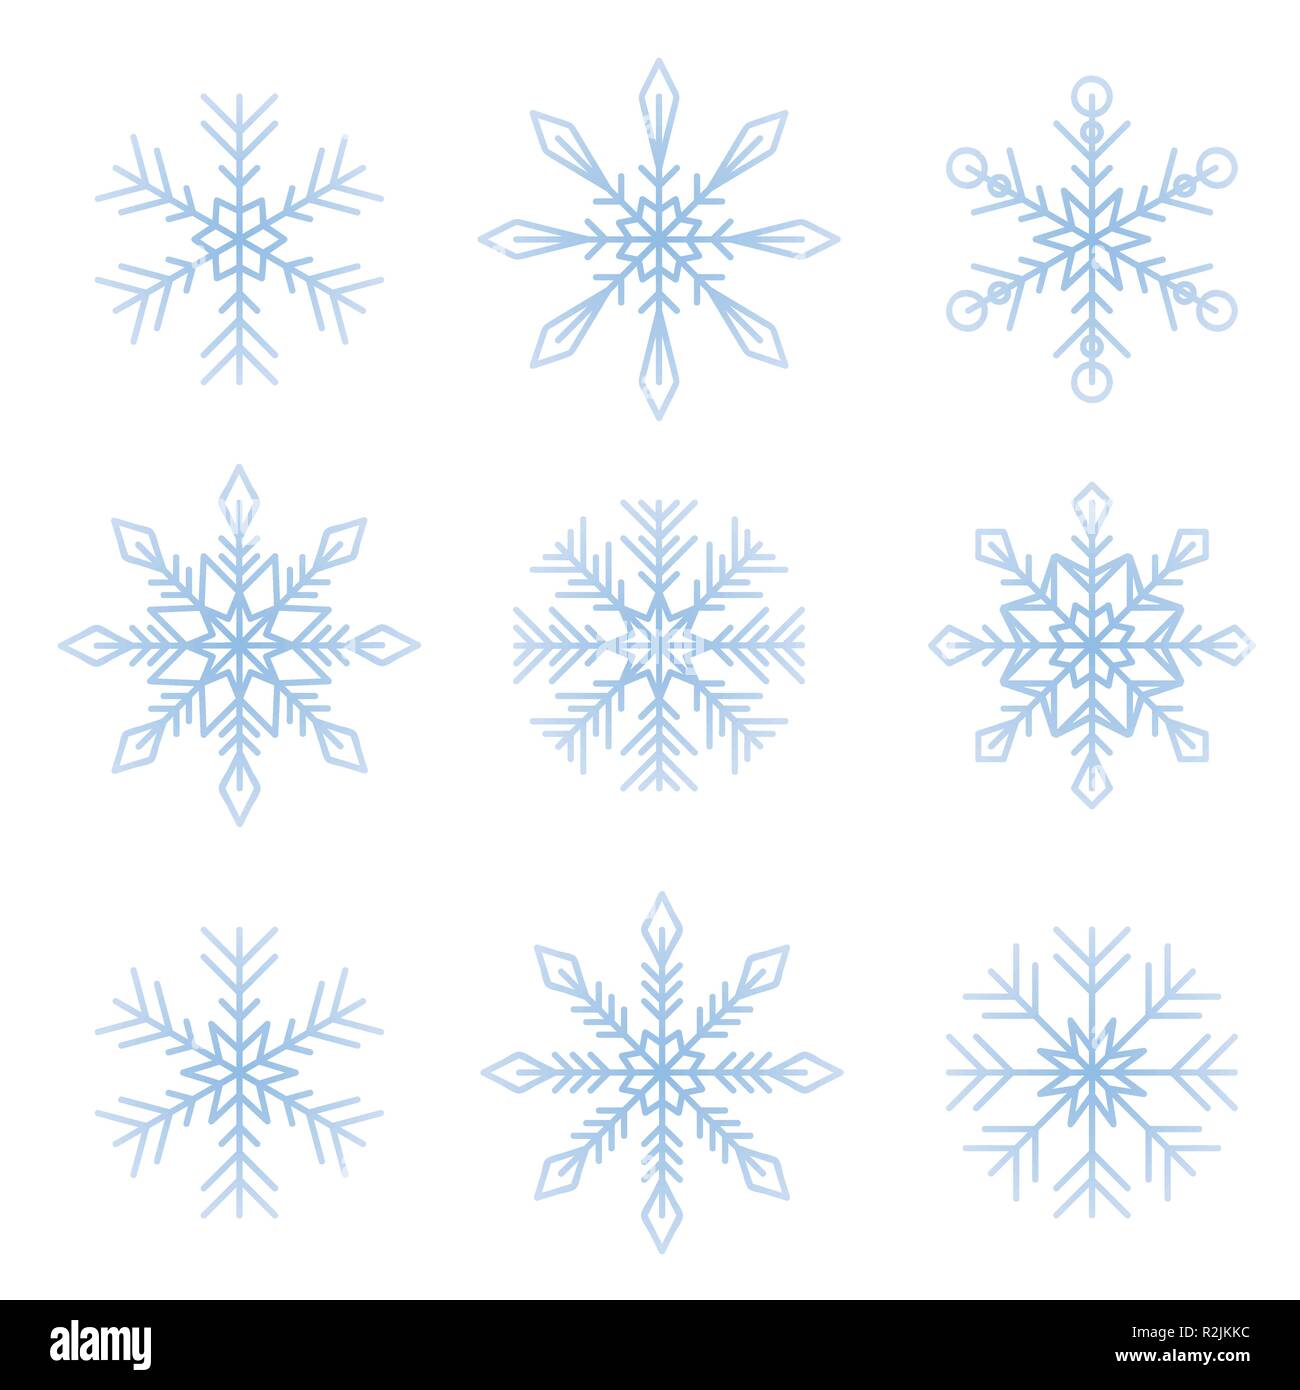 bright snowflakes winter set isolated on white background vector illustration EPS10 Stock Vector